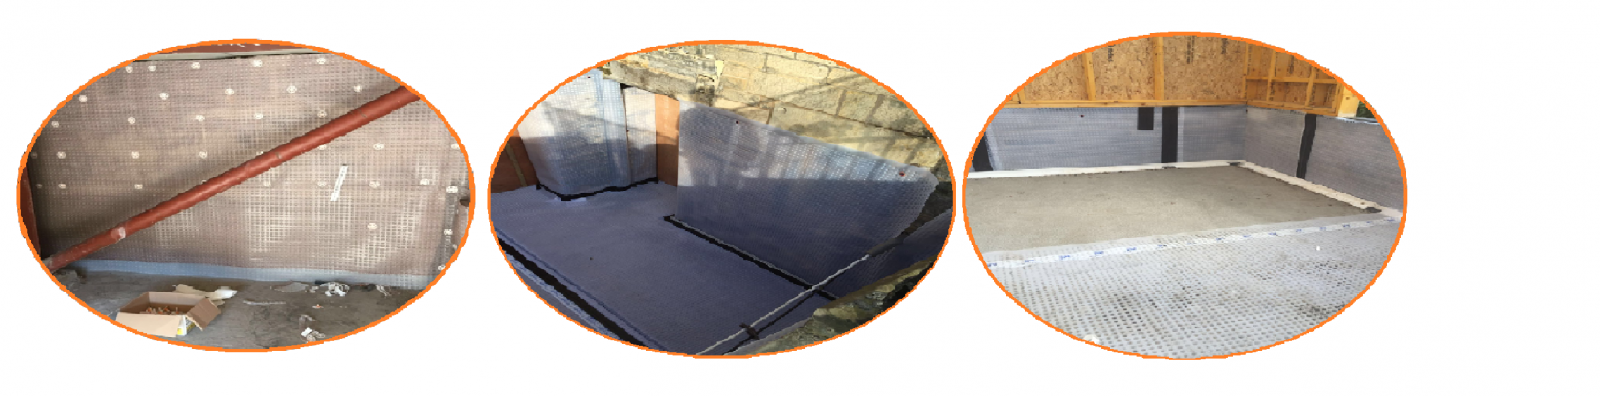 basement waterproofing system in 3 circular images